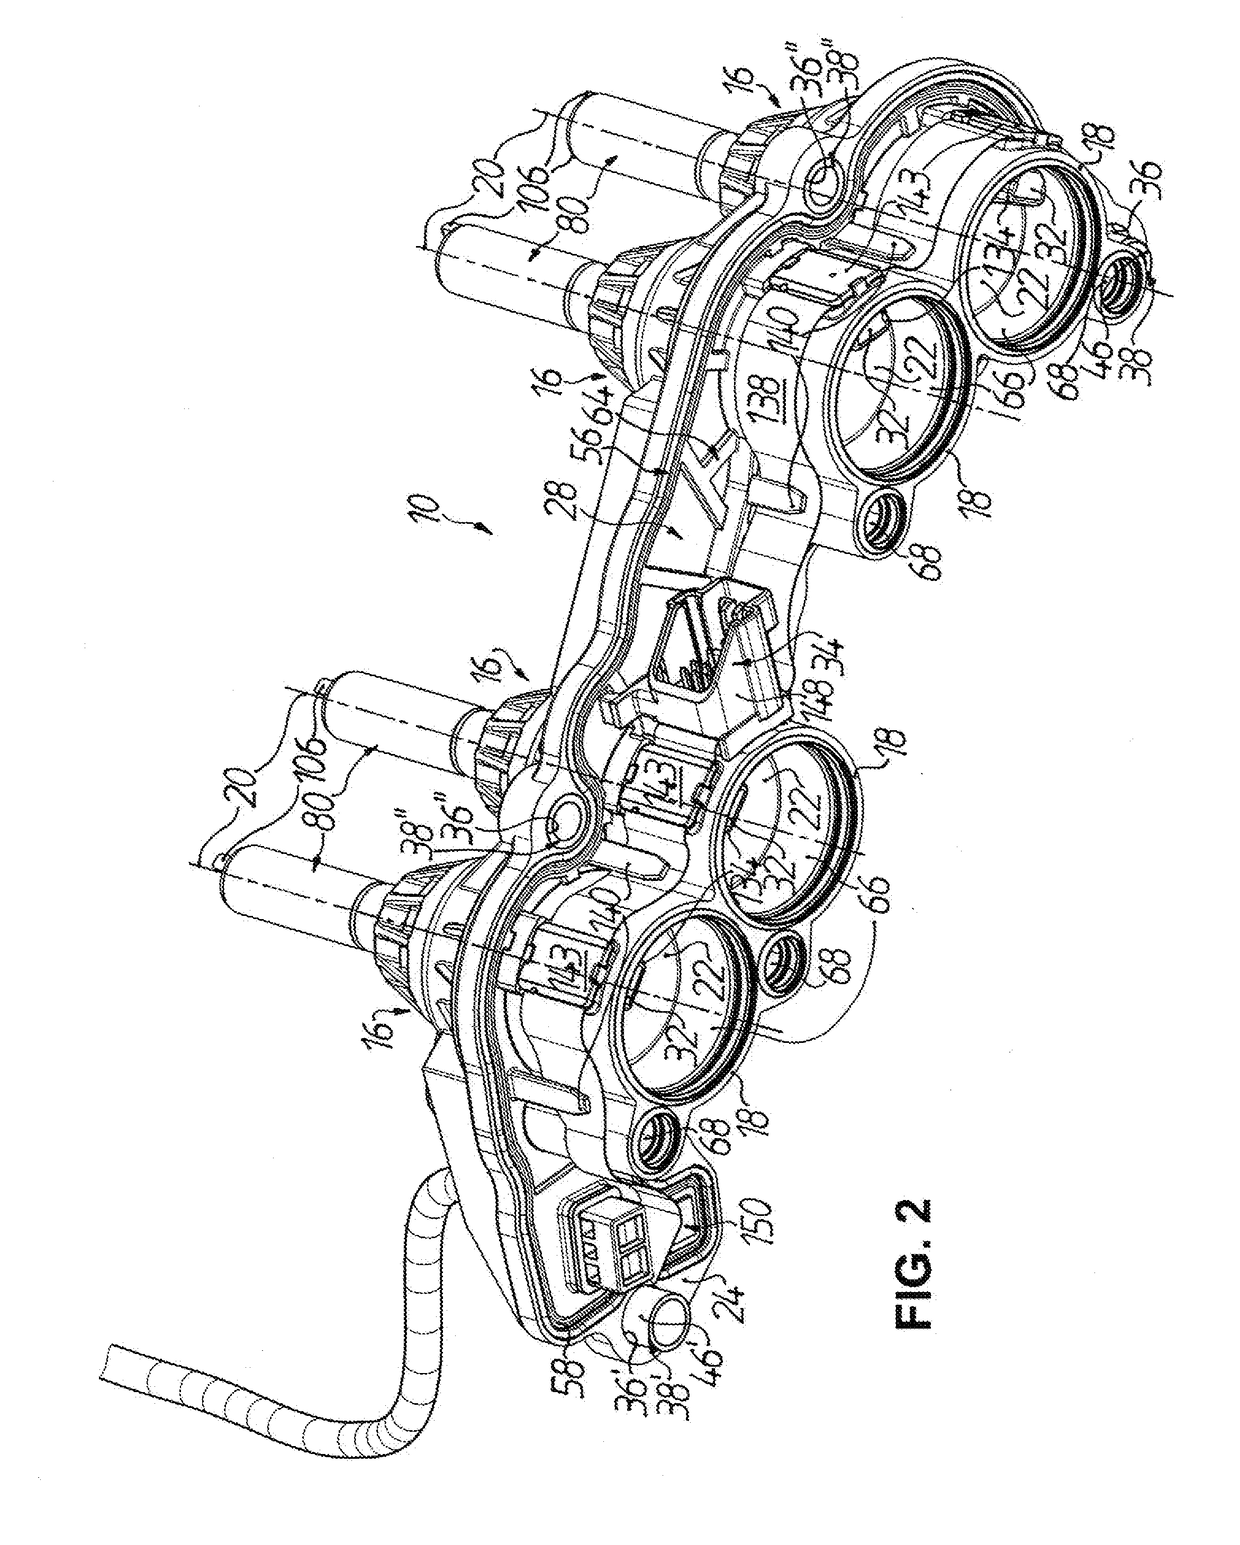 Hydraulic actuating device for actuation of setting elements in a motor vehicle transmission